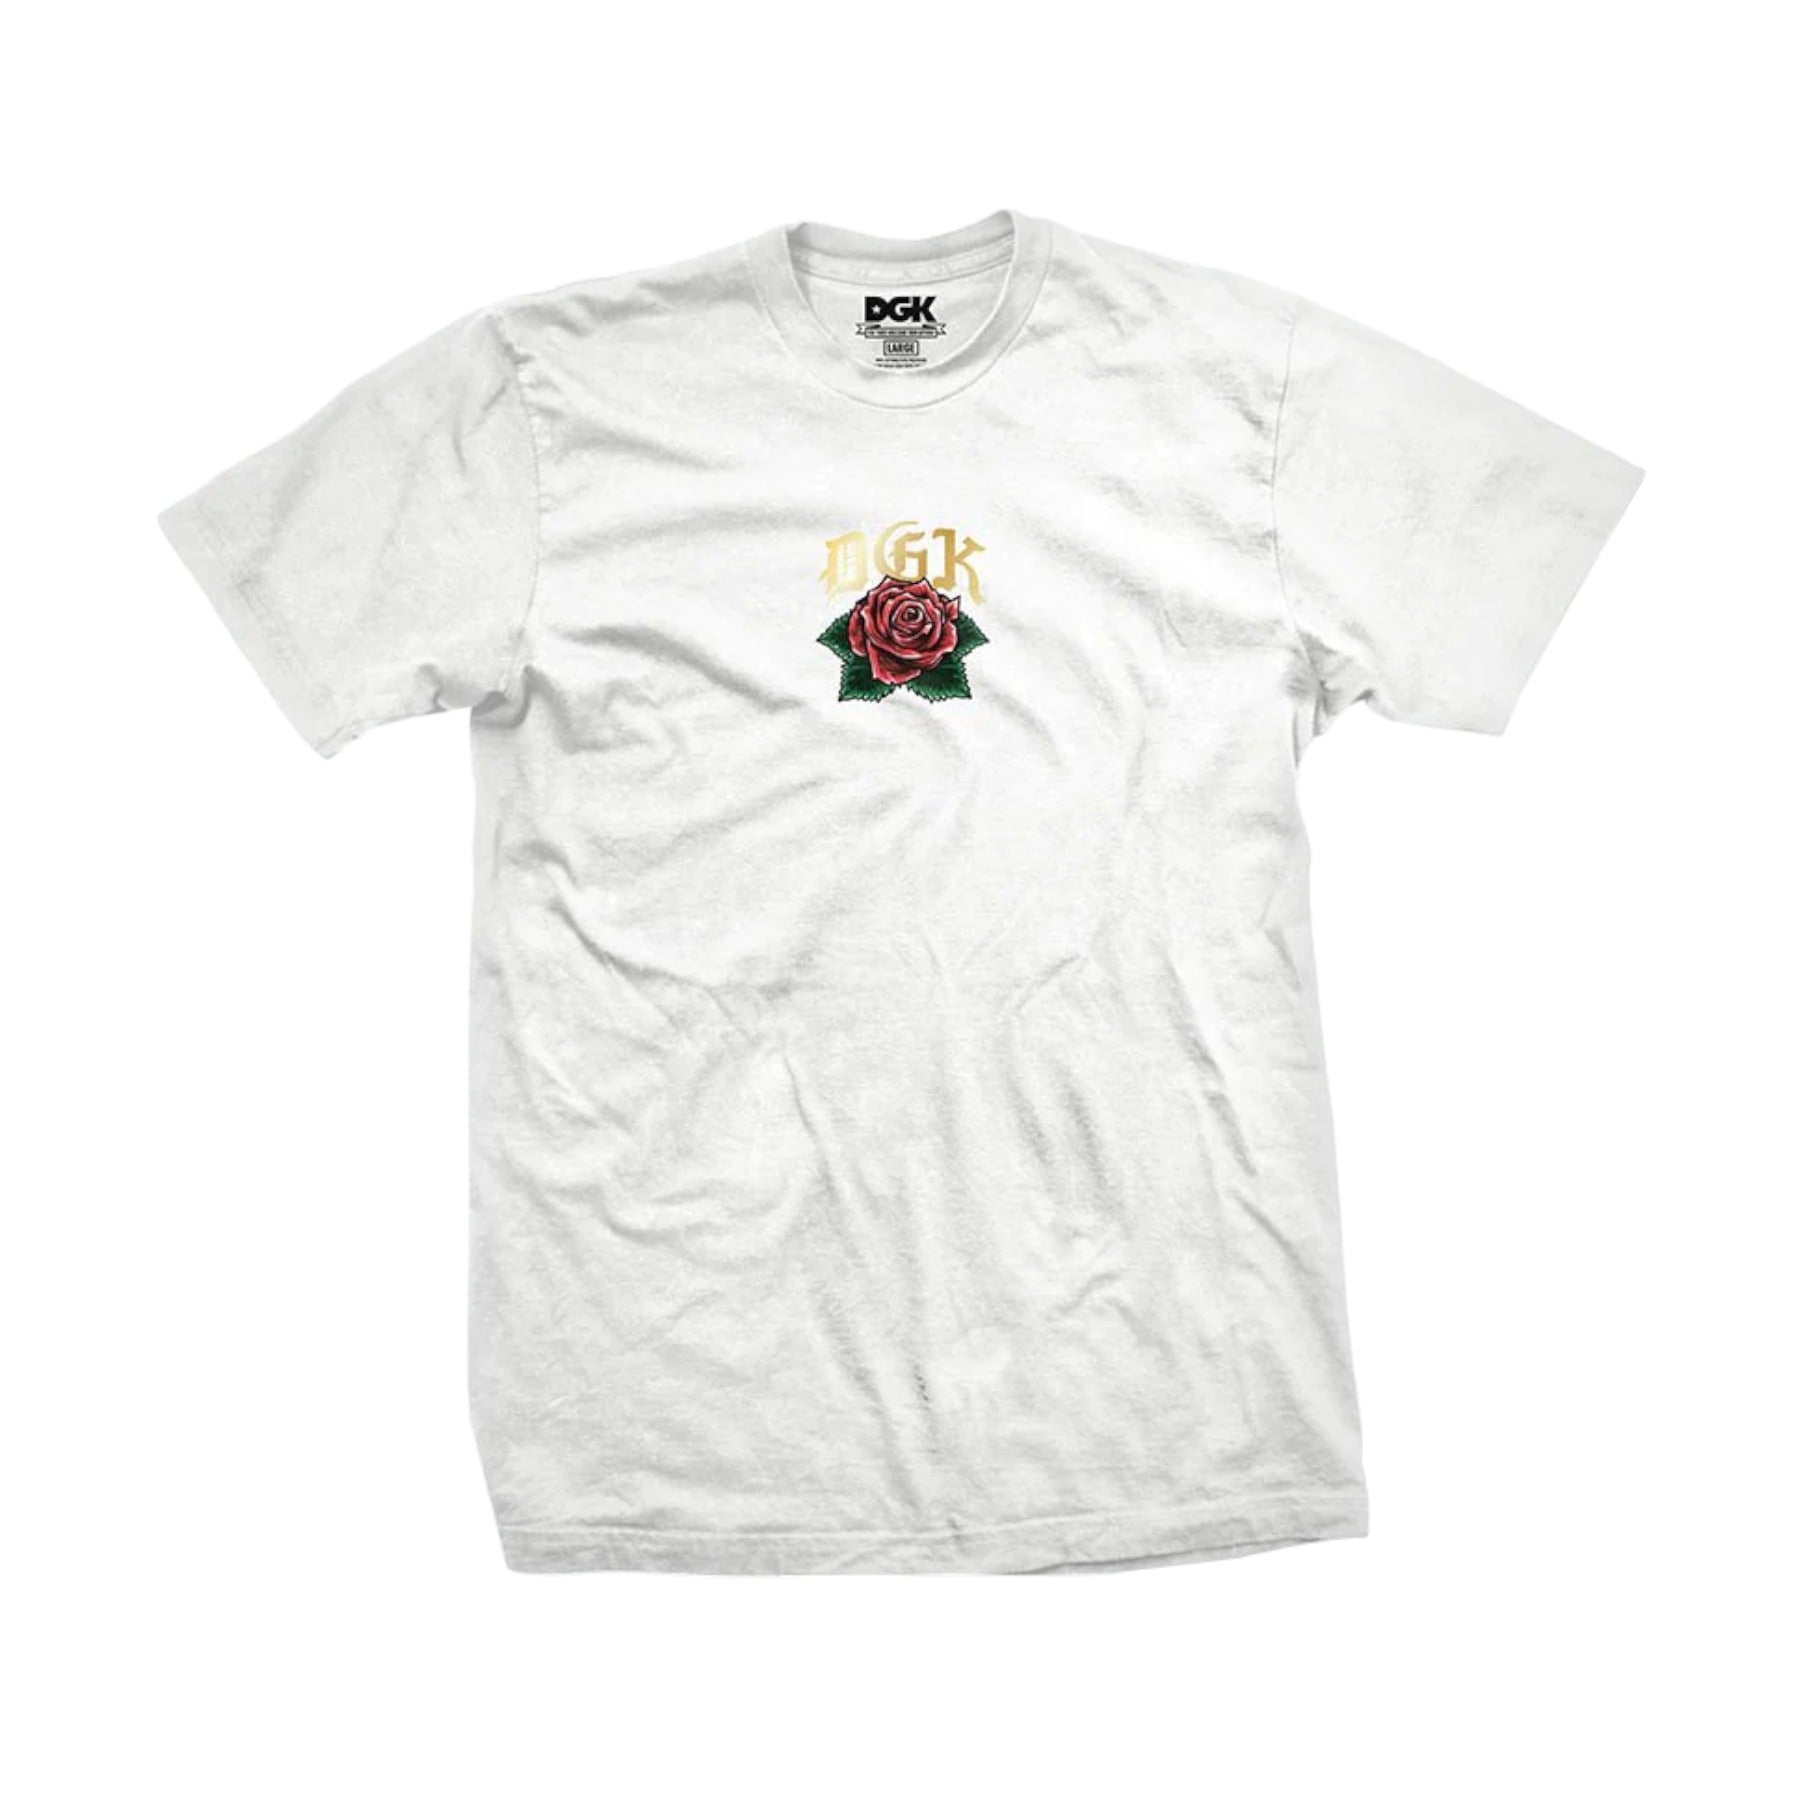 DGK Guadalupe Tee - White